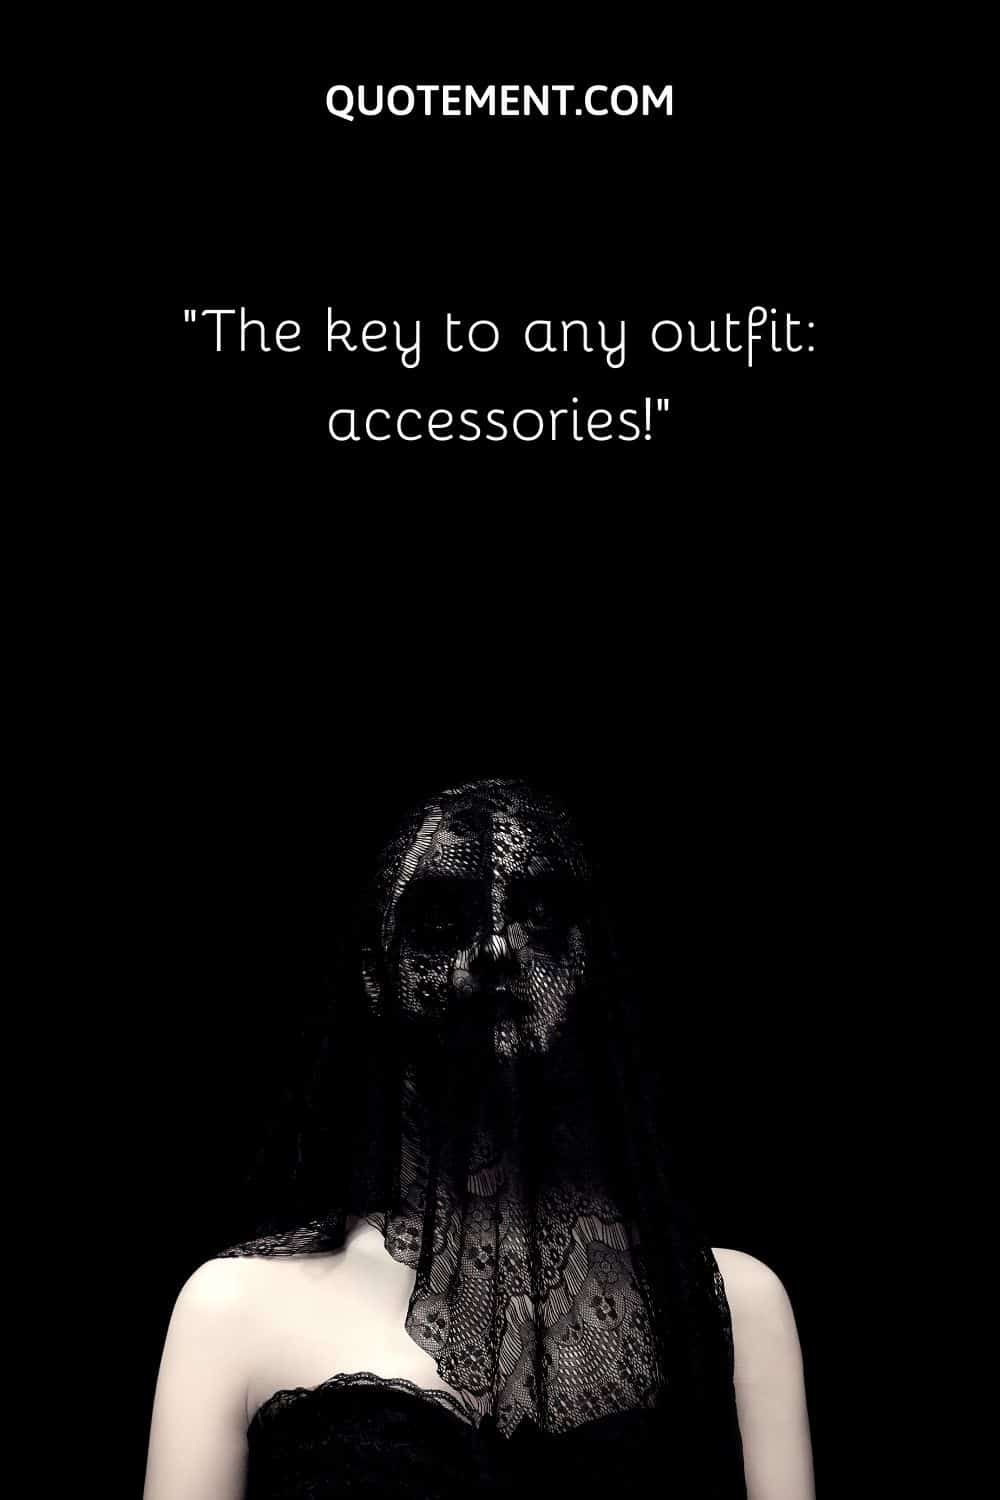 The key to any outfit accessories